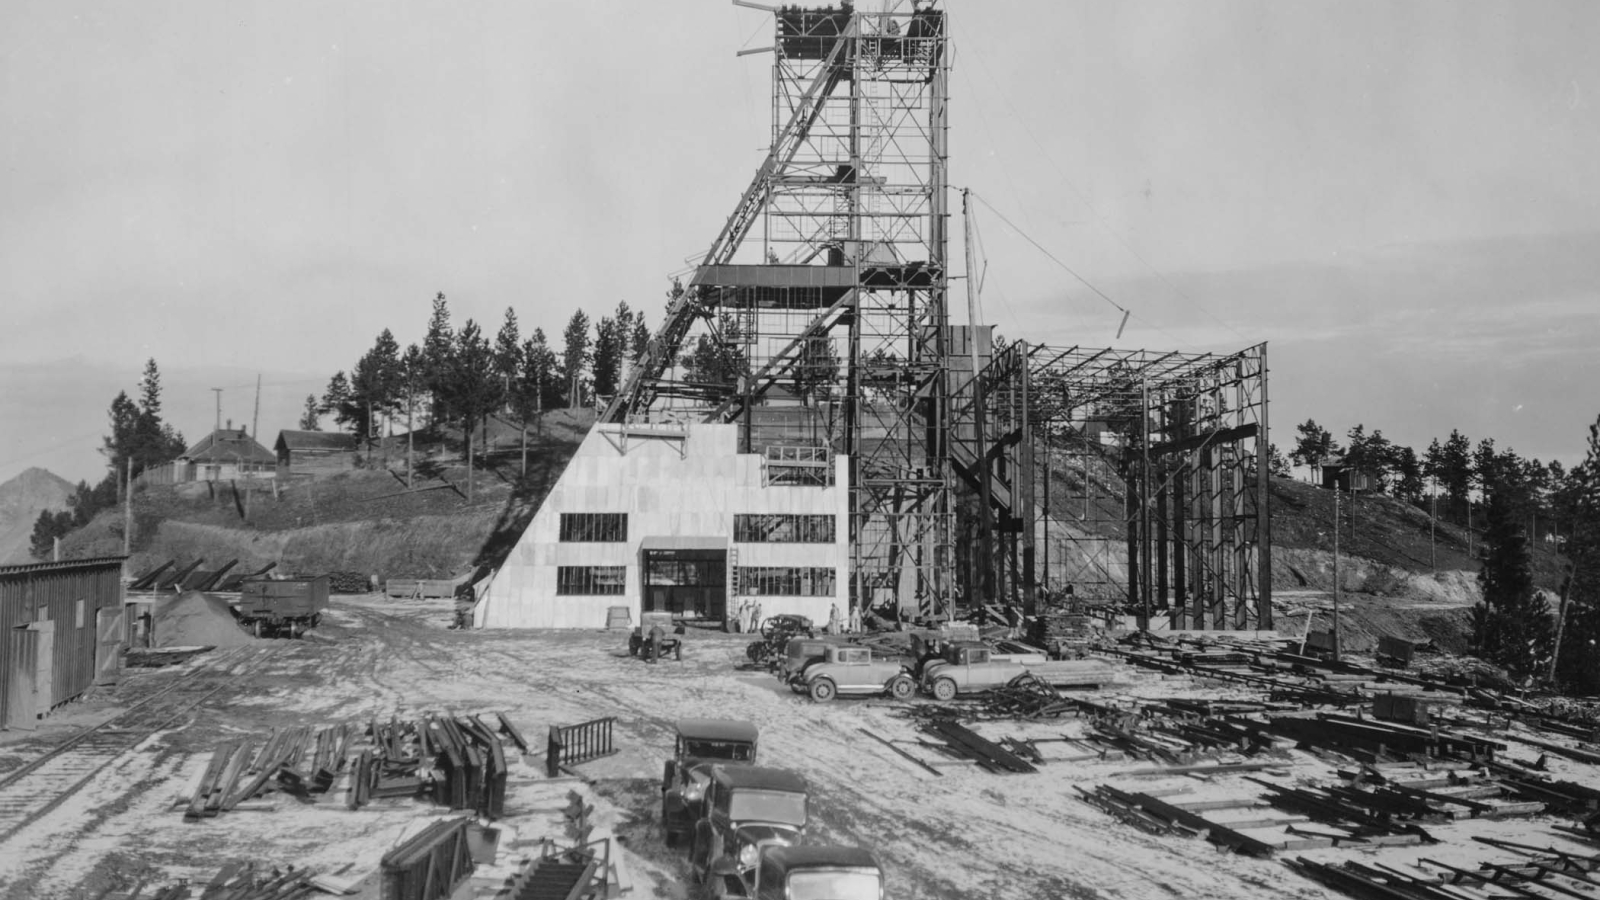 The Ross Shaft Headframe during construction in 1933.